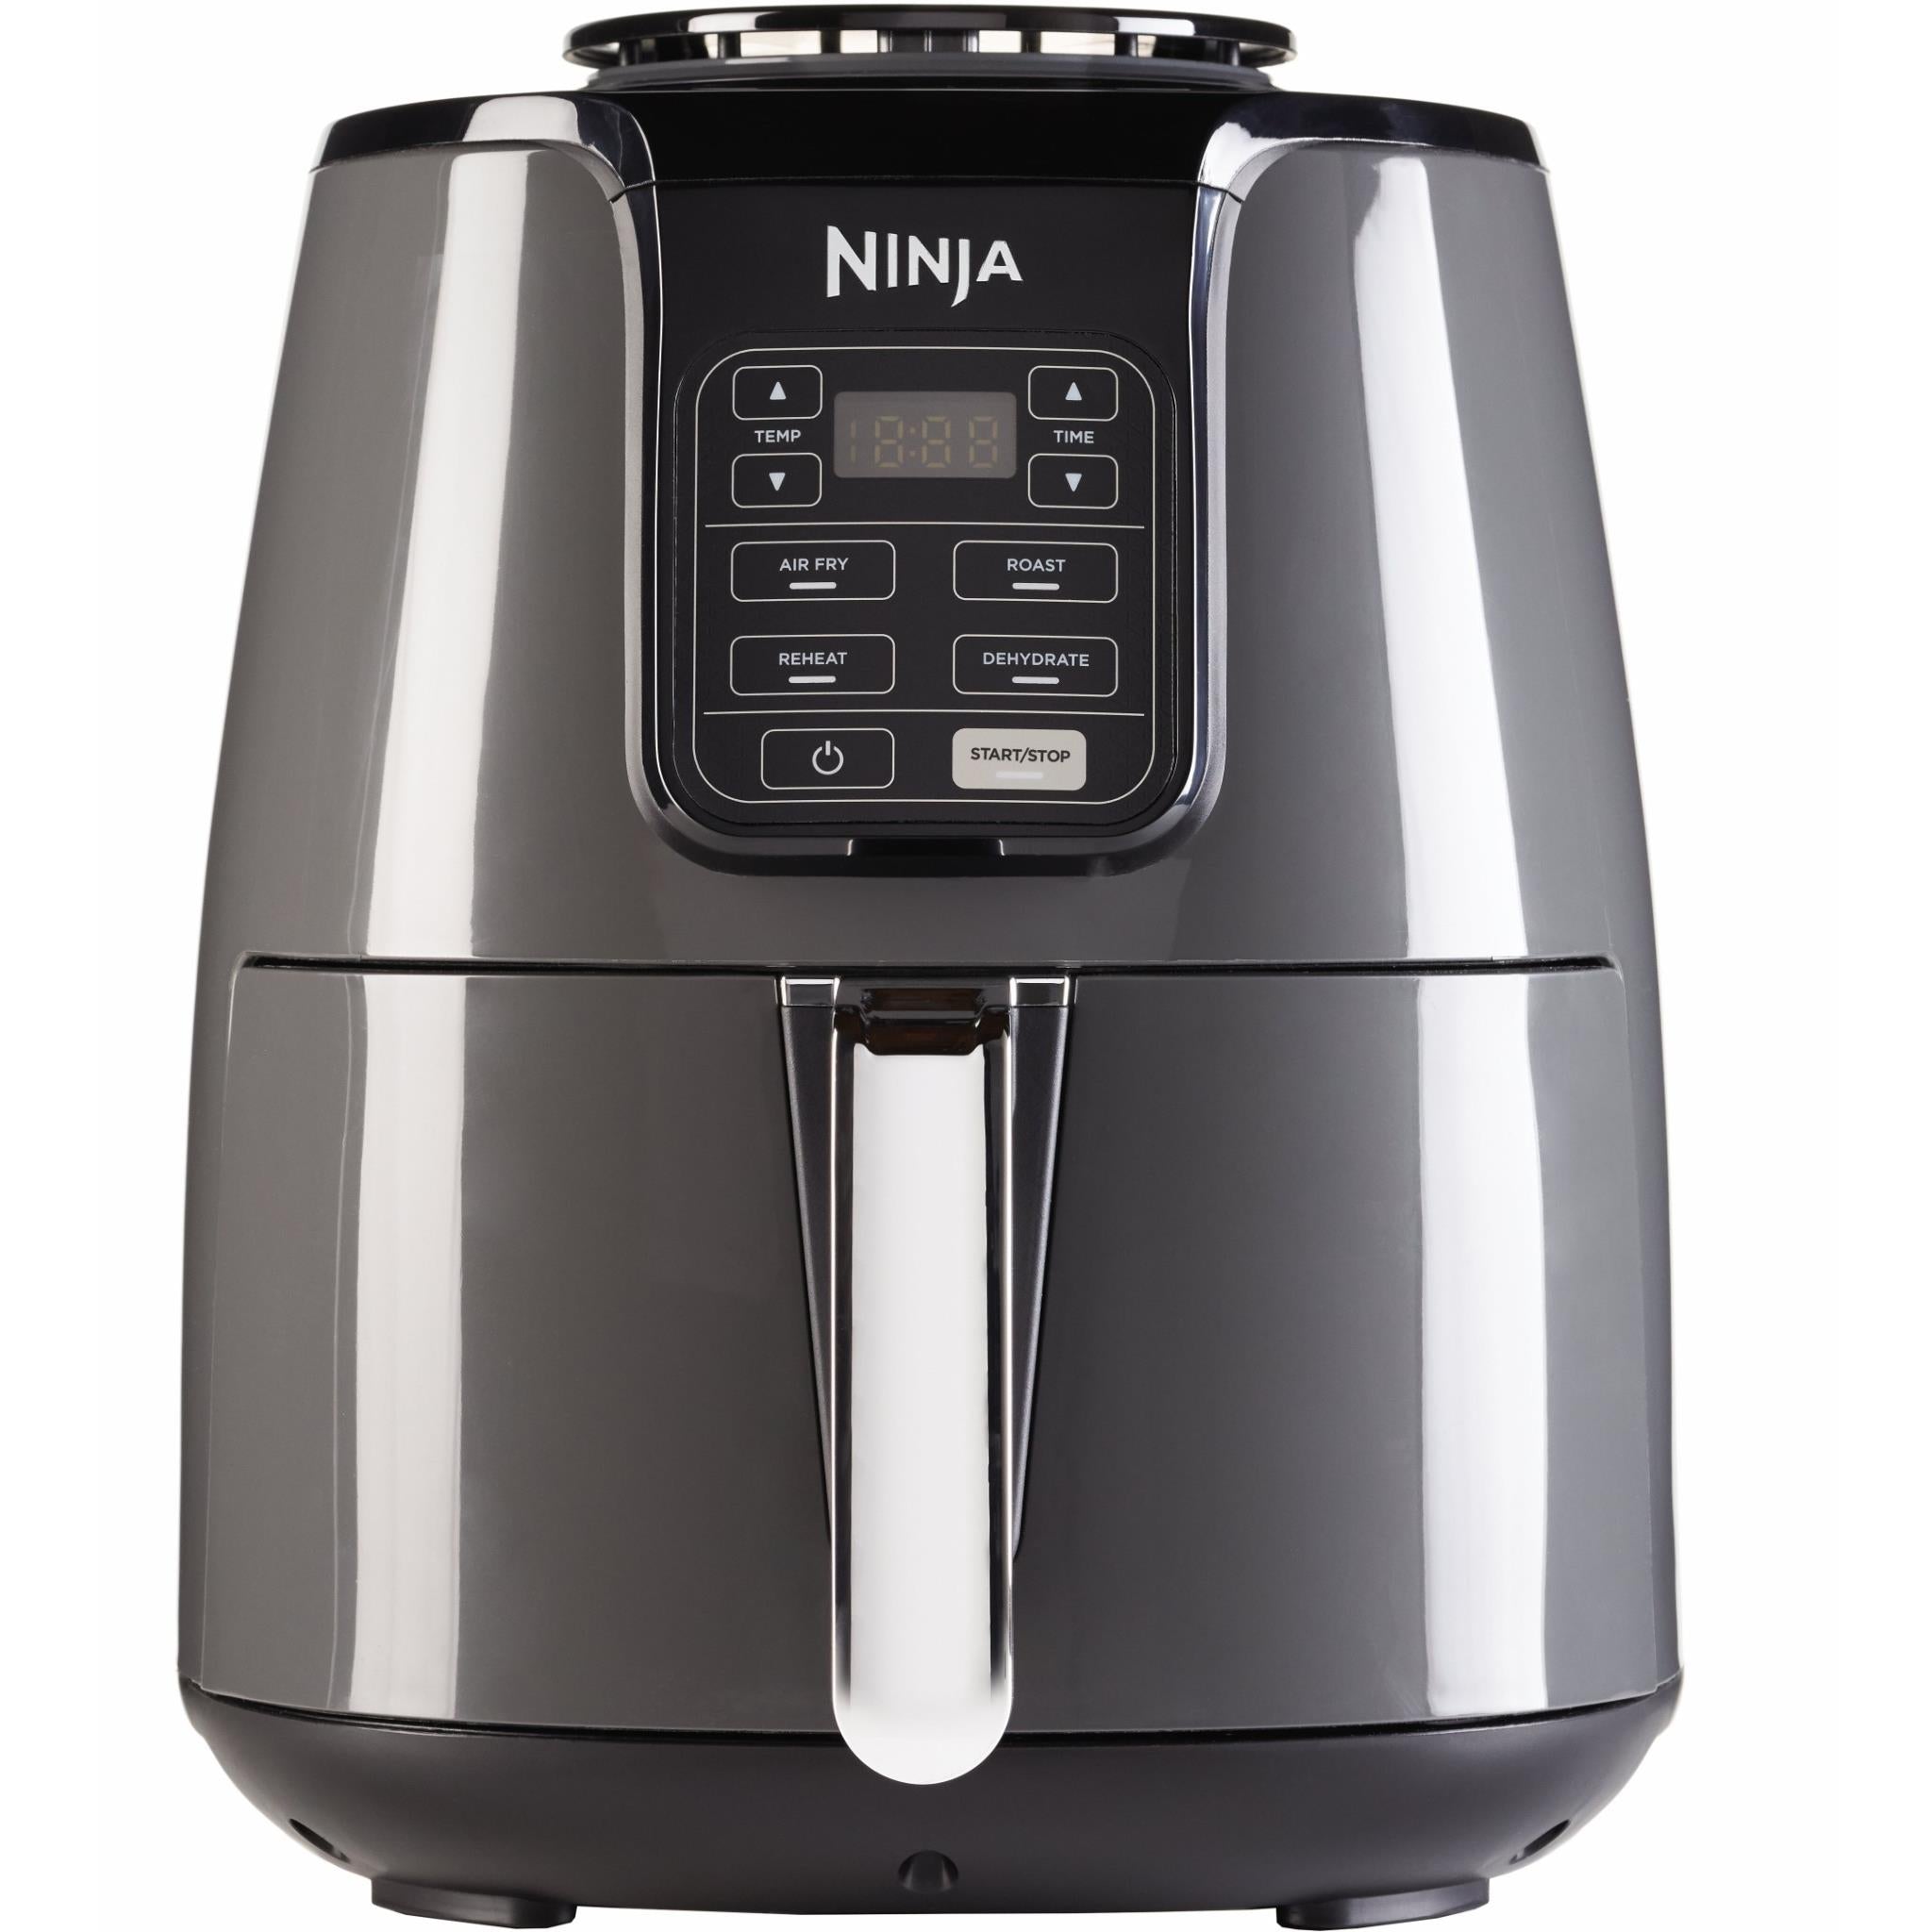 Ninja Foodi Sp101 Ft102co Digital Fry Convection Oven Toaster Air Fryer Flip Away For Storage With Xl Capacity And A Stainless Steel Finish